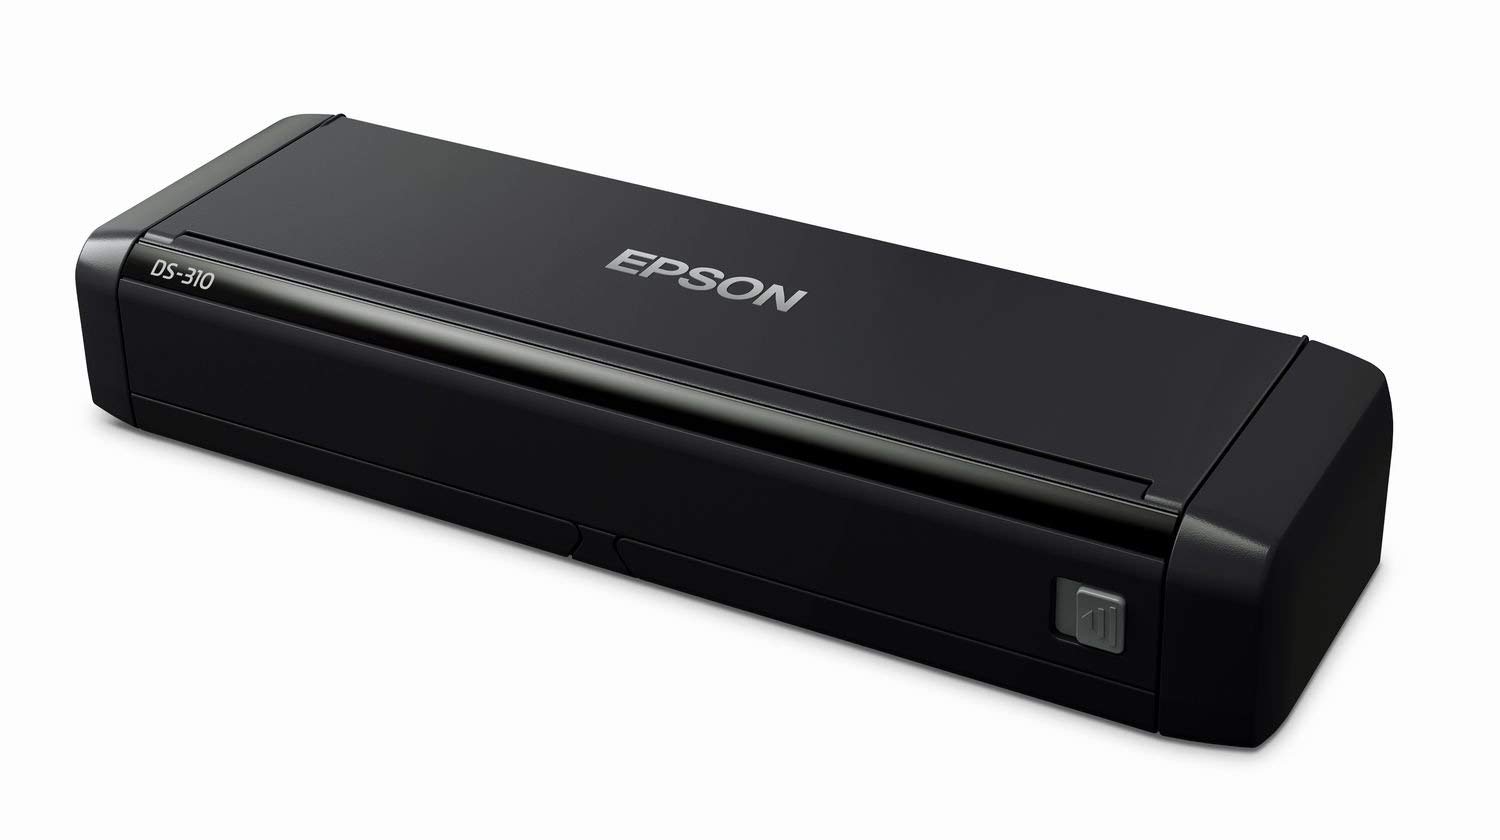 EPSON (Epson) A4 document scanner DS-310 double-sided correspondence